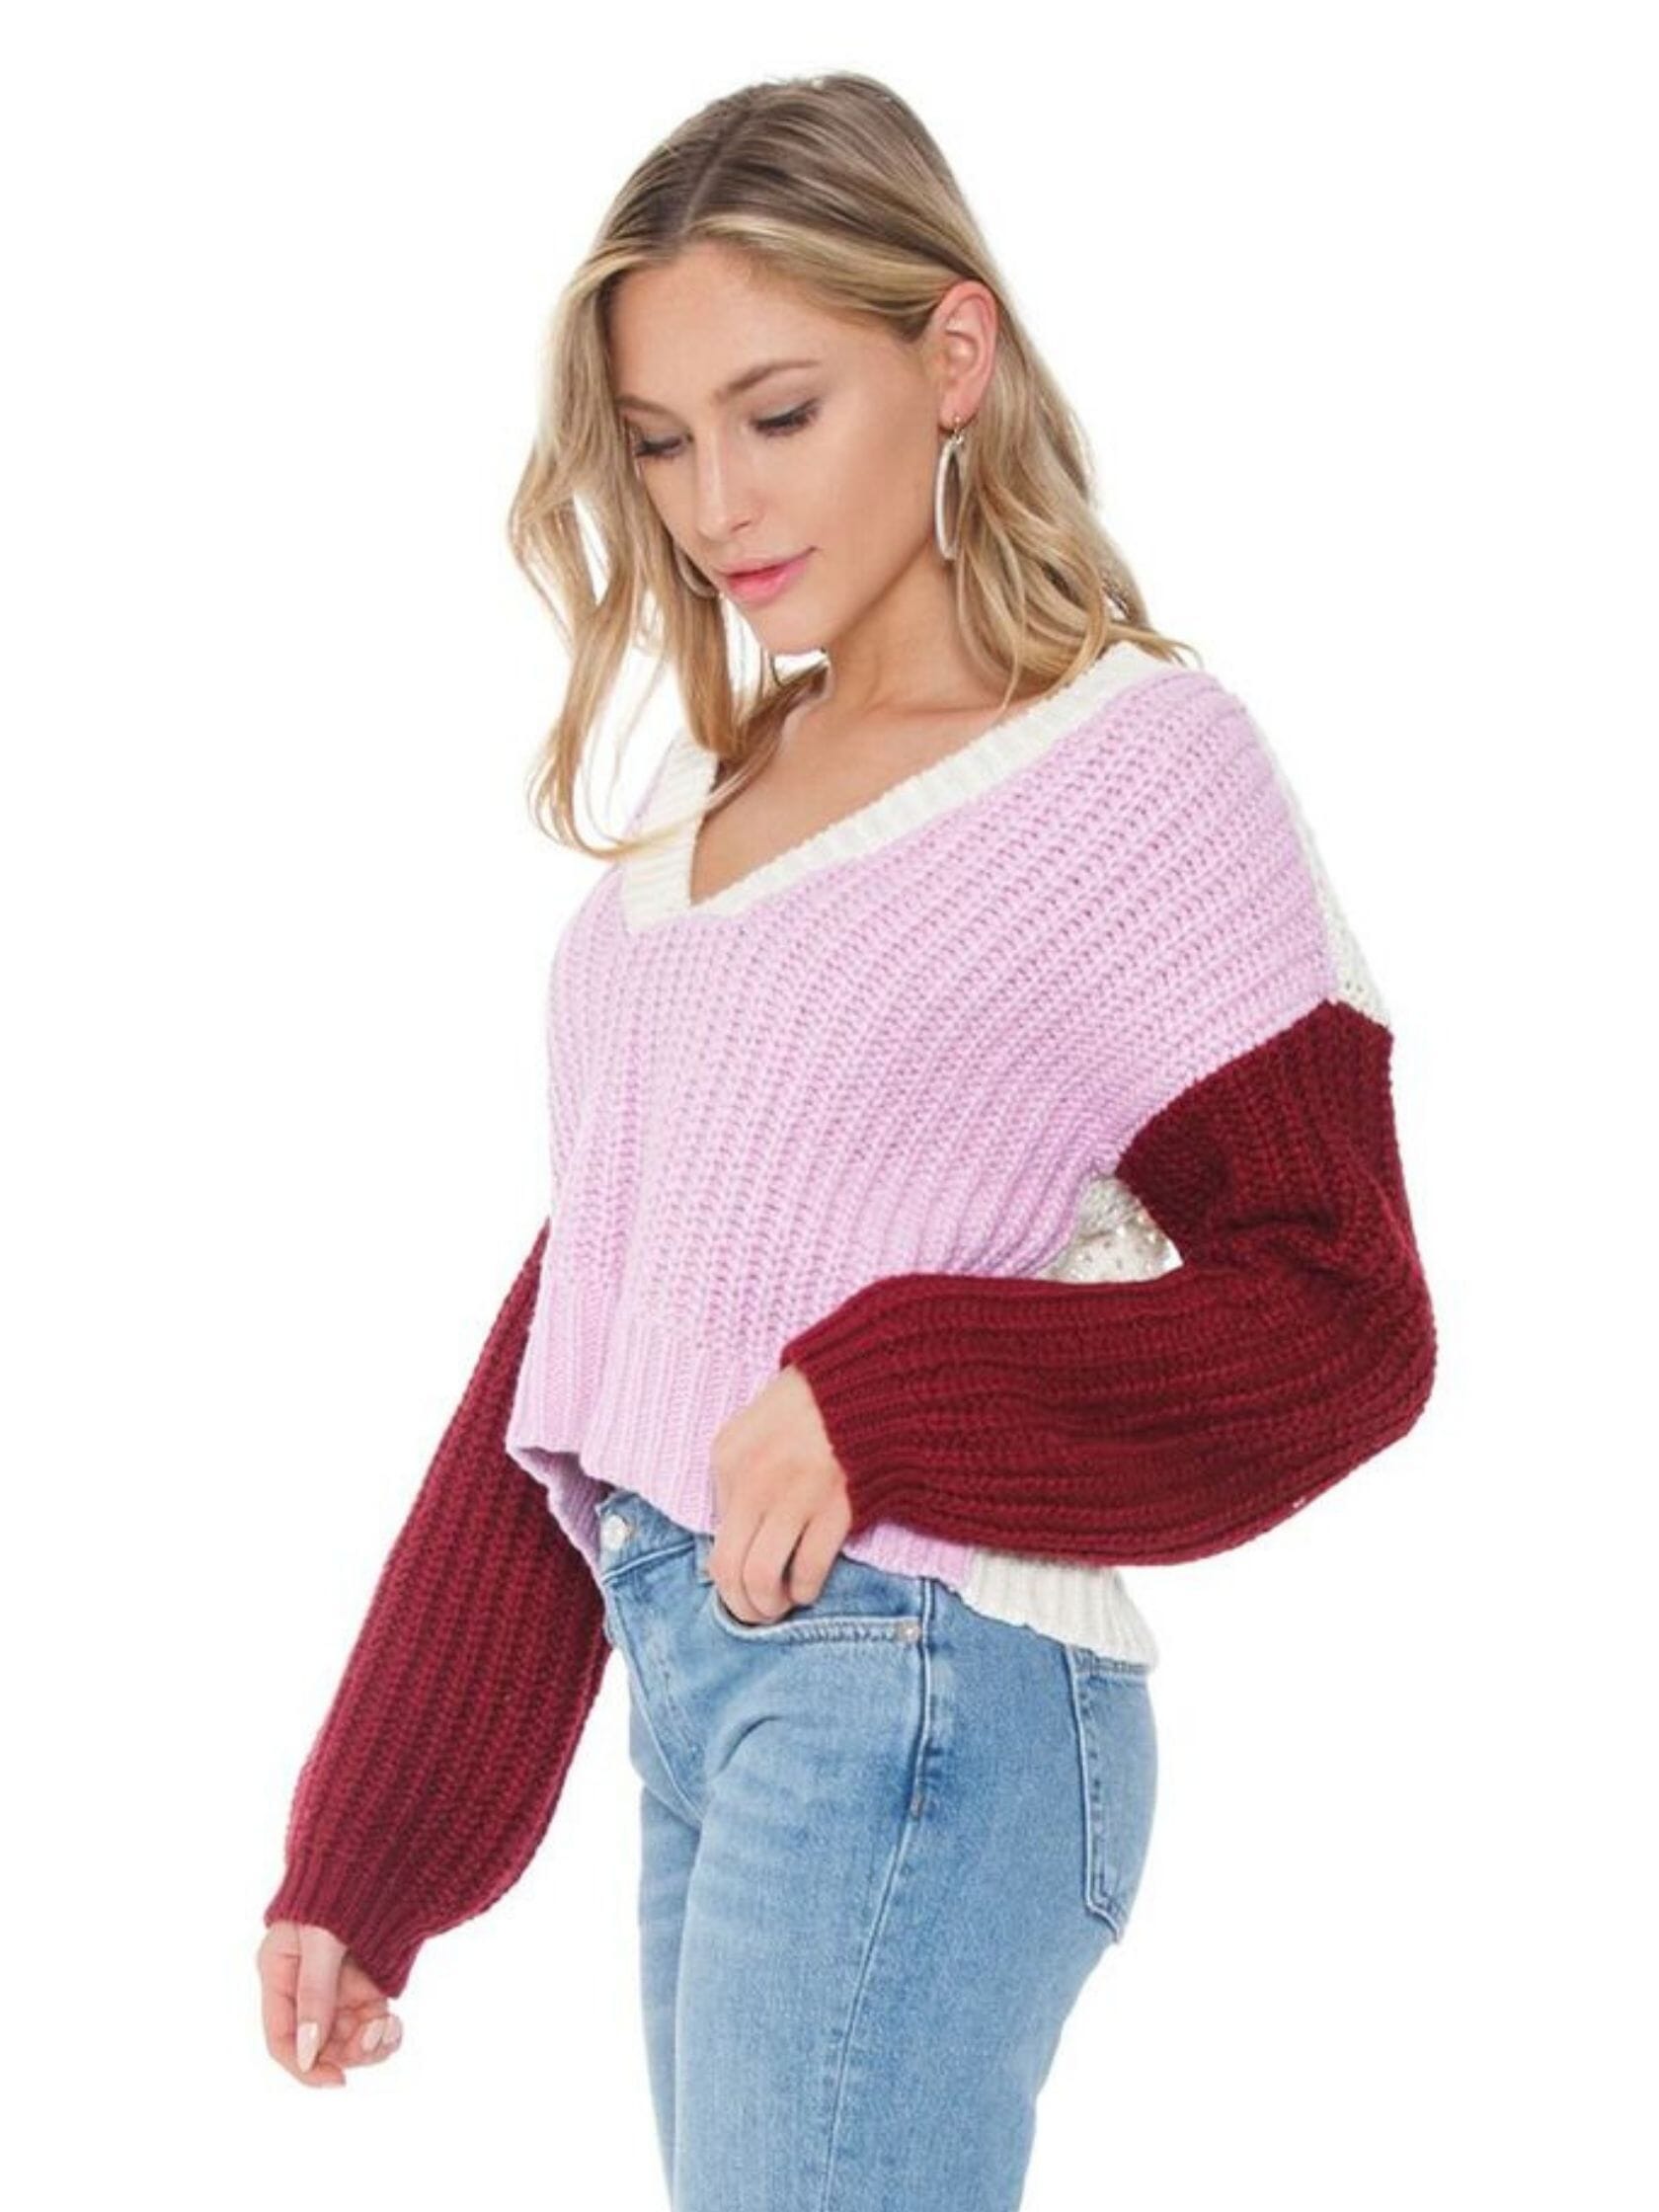 Wildfox Color Me Beverly Sweater in Crepe